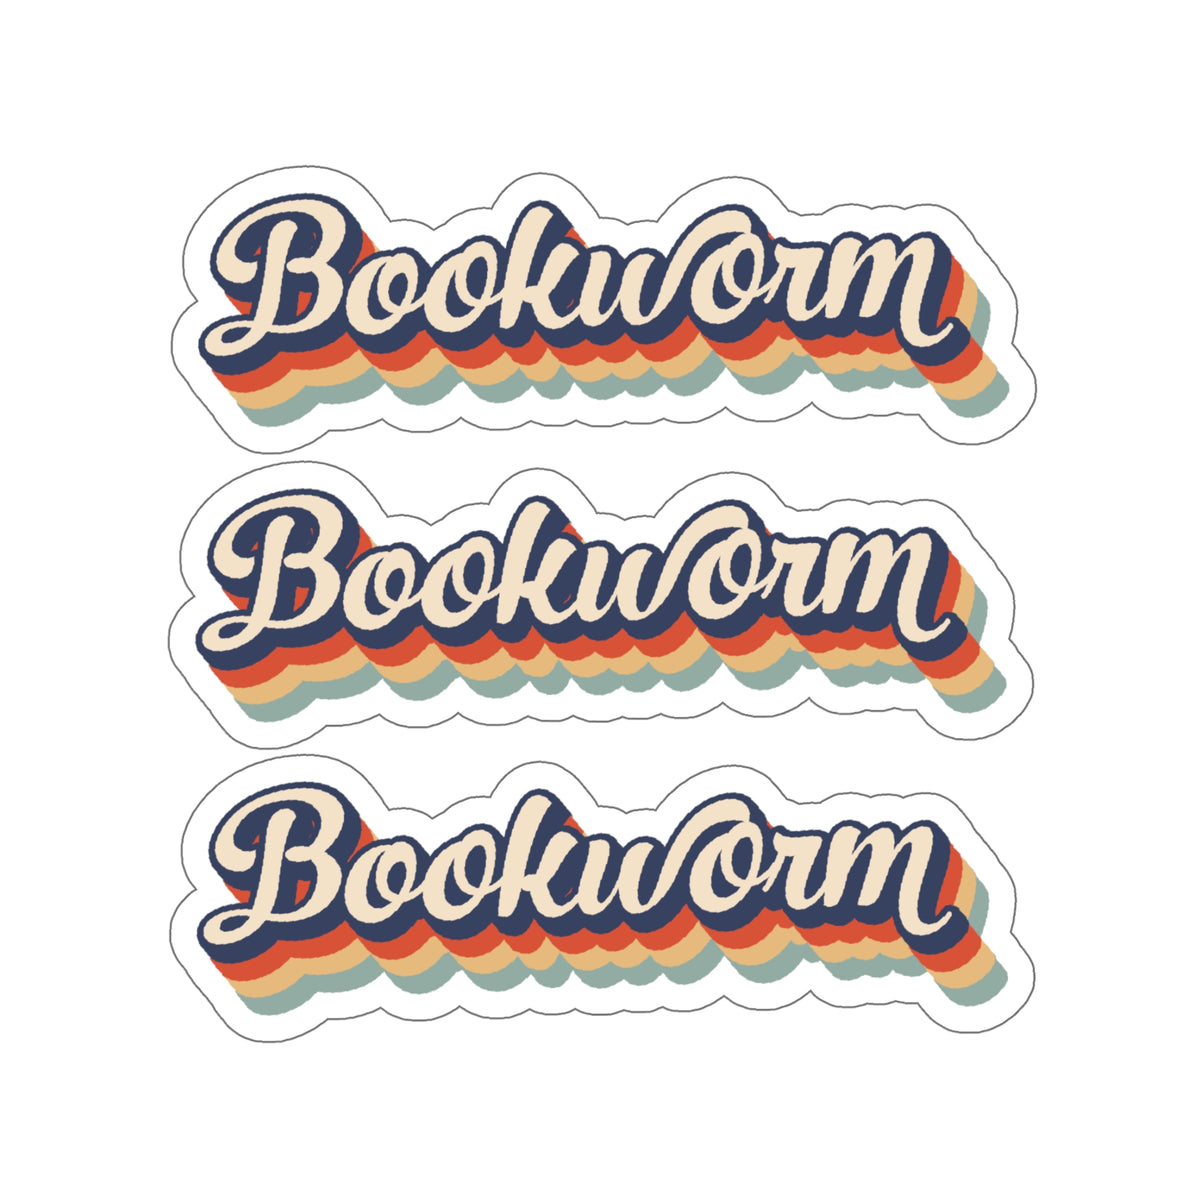 Retro Bookworm Book Lover Kiss-Cut Stickers | Book Worm Gifts